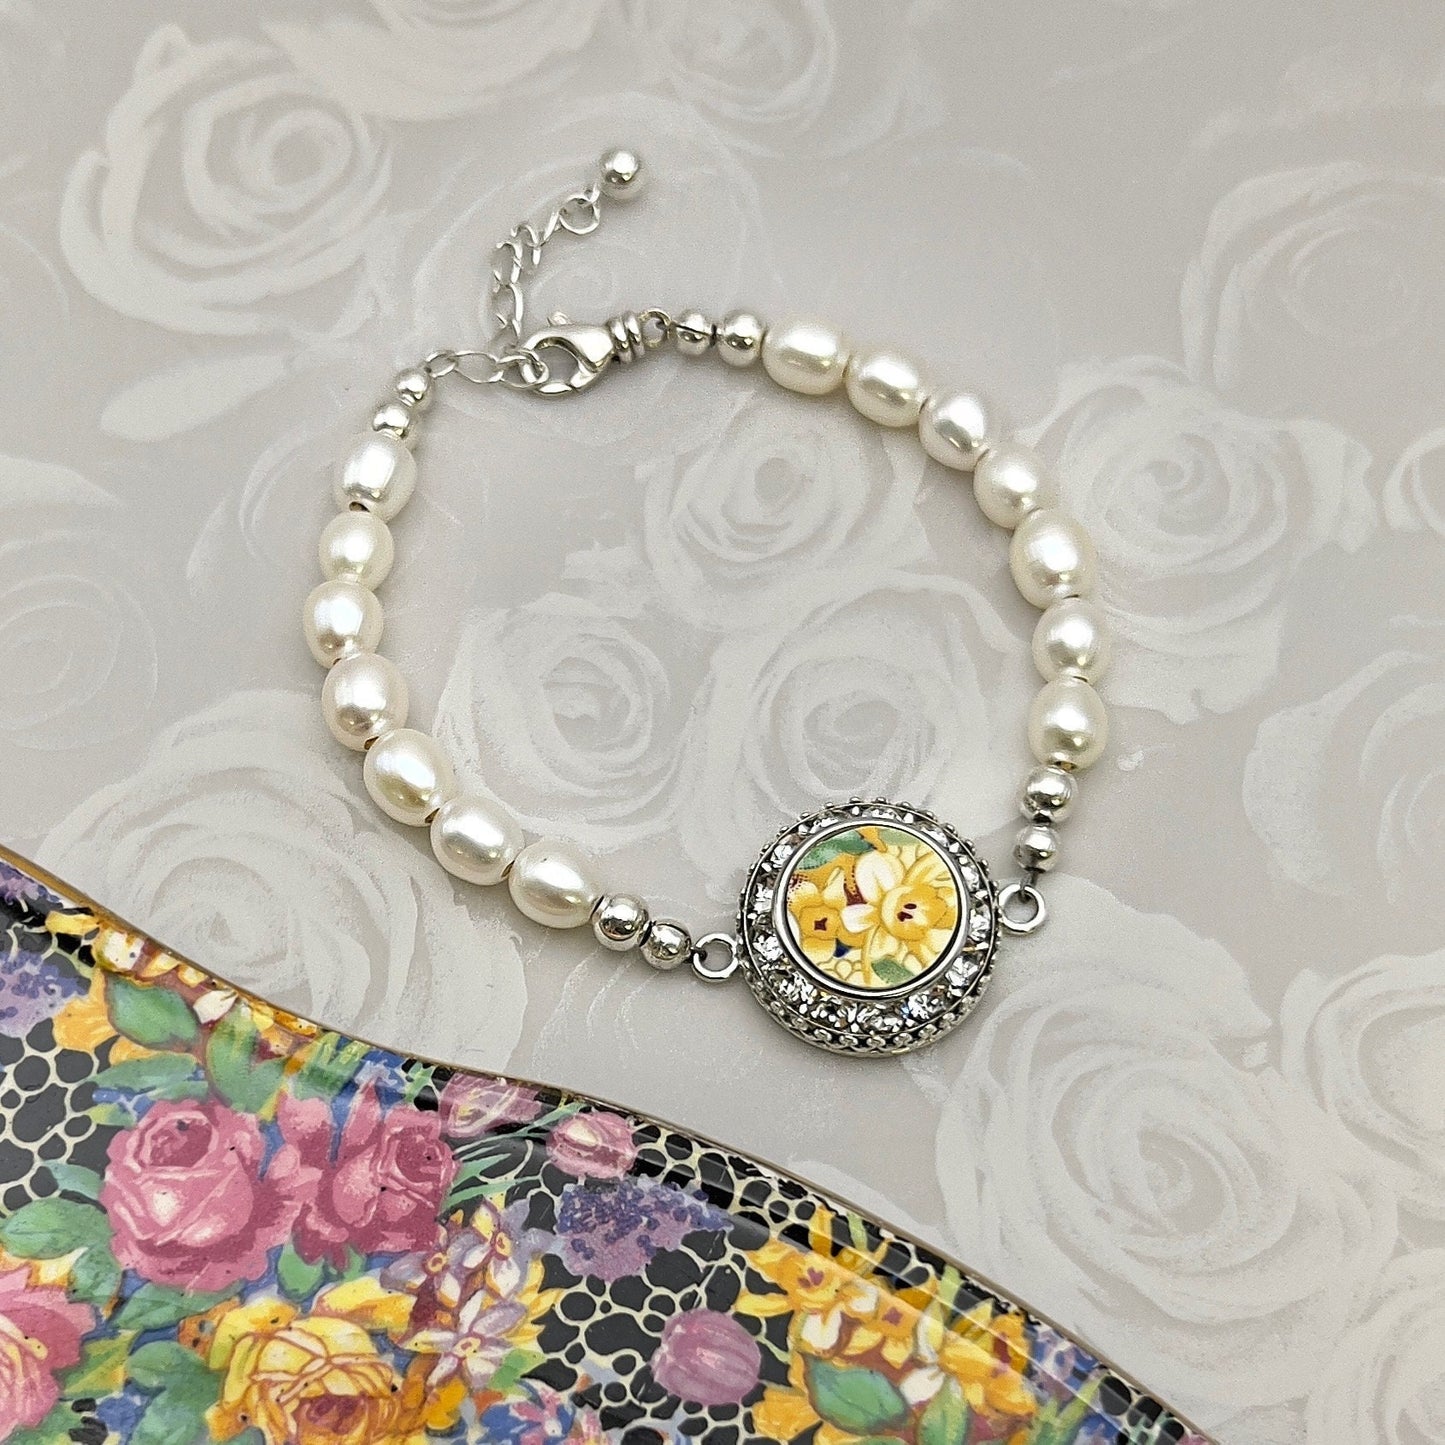 Yellow Daffodil Crystal and Pearl Bracelet, Vintage Broken China Jewelry, Unique Gifts for Women